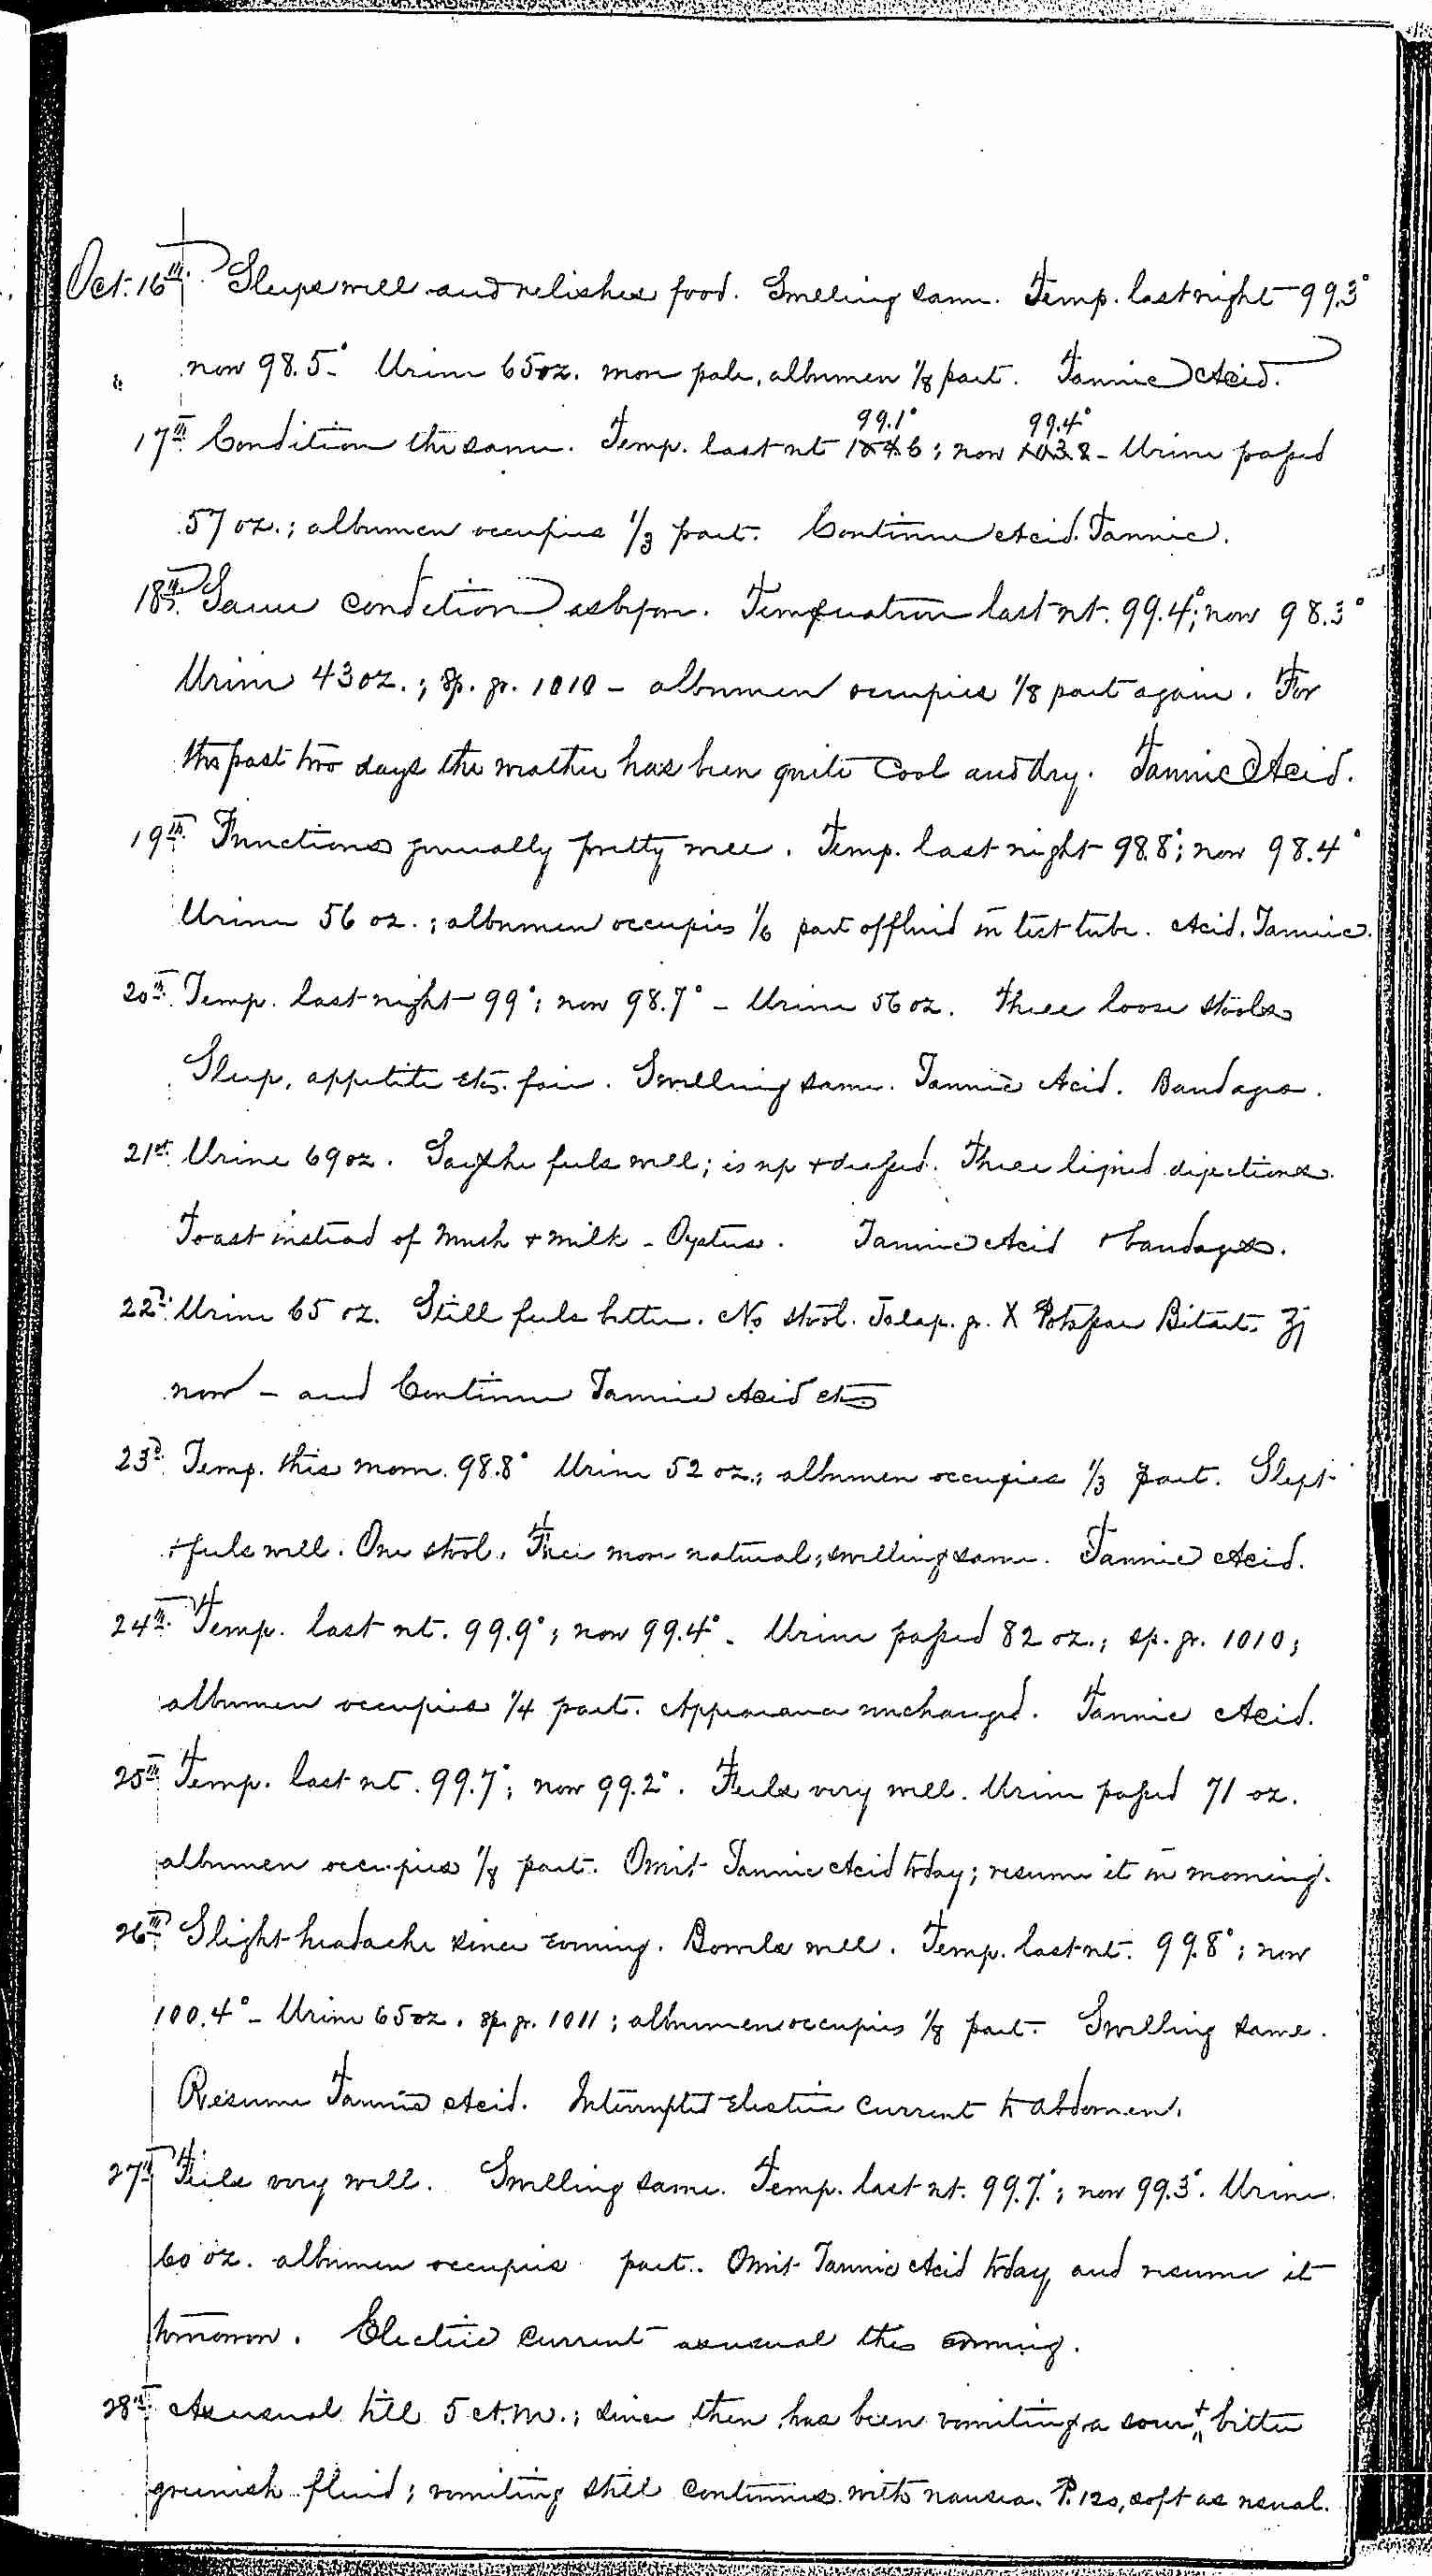 Entry for Bernard Coyne (page 7 of 13) in the log Hospital Tickets and Case Papers - Naval Hospital - Washington, D.C. - 1868-69